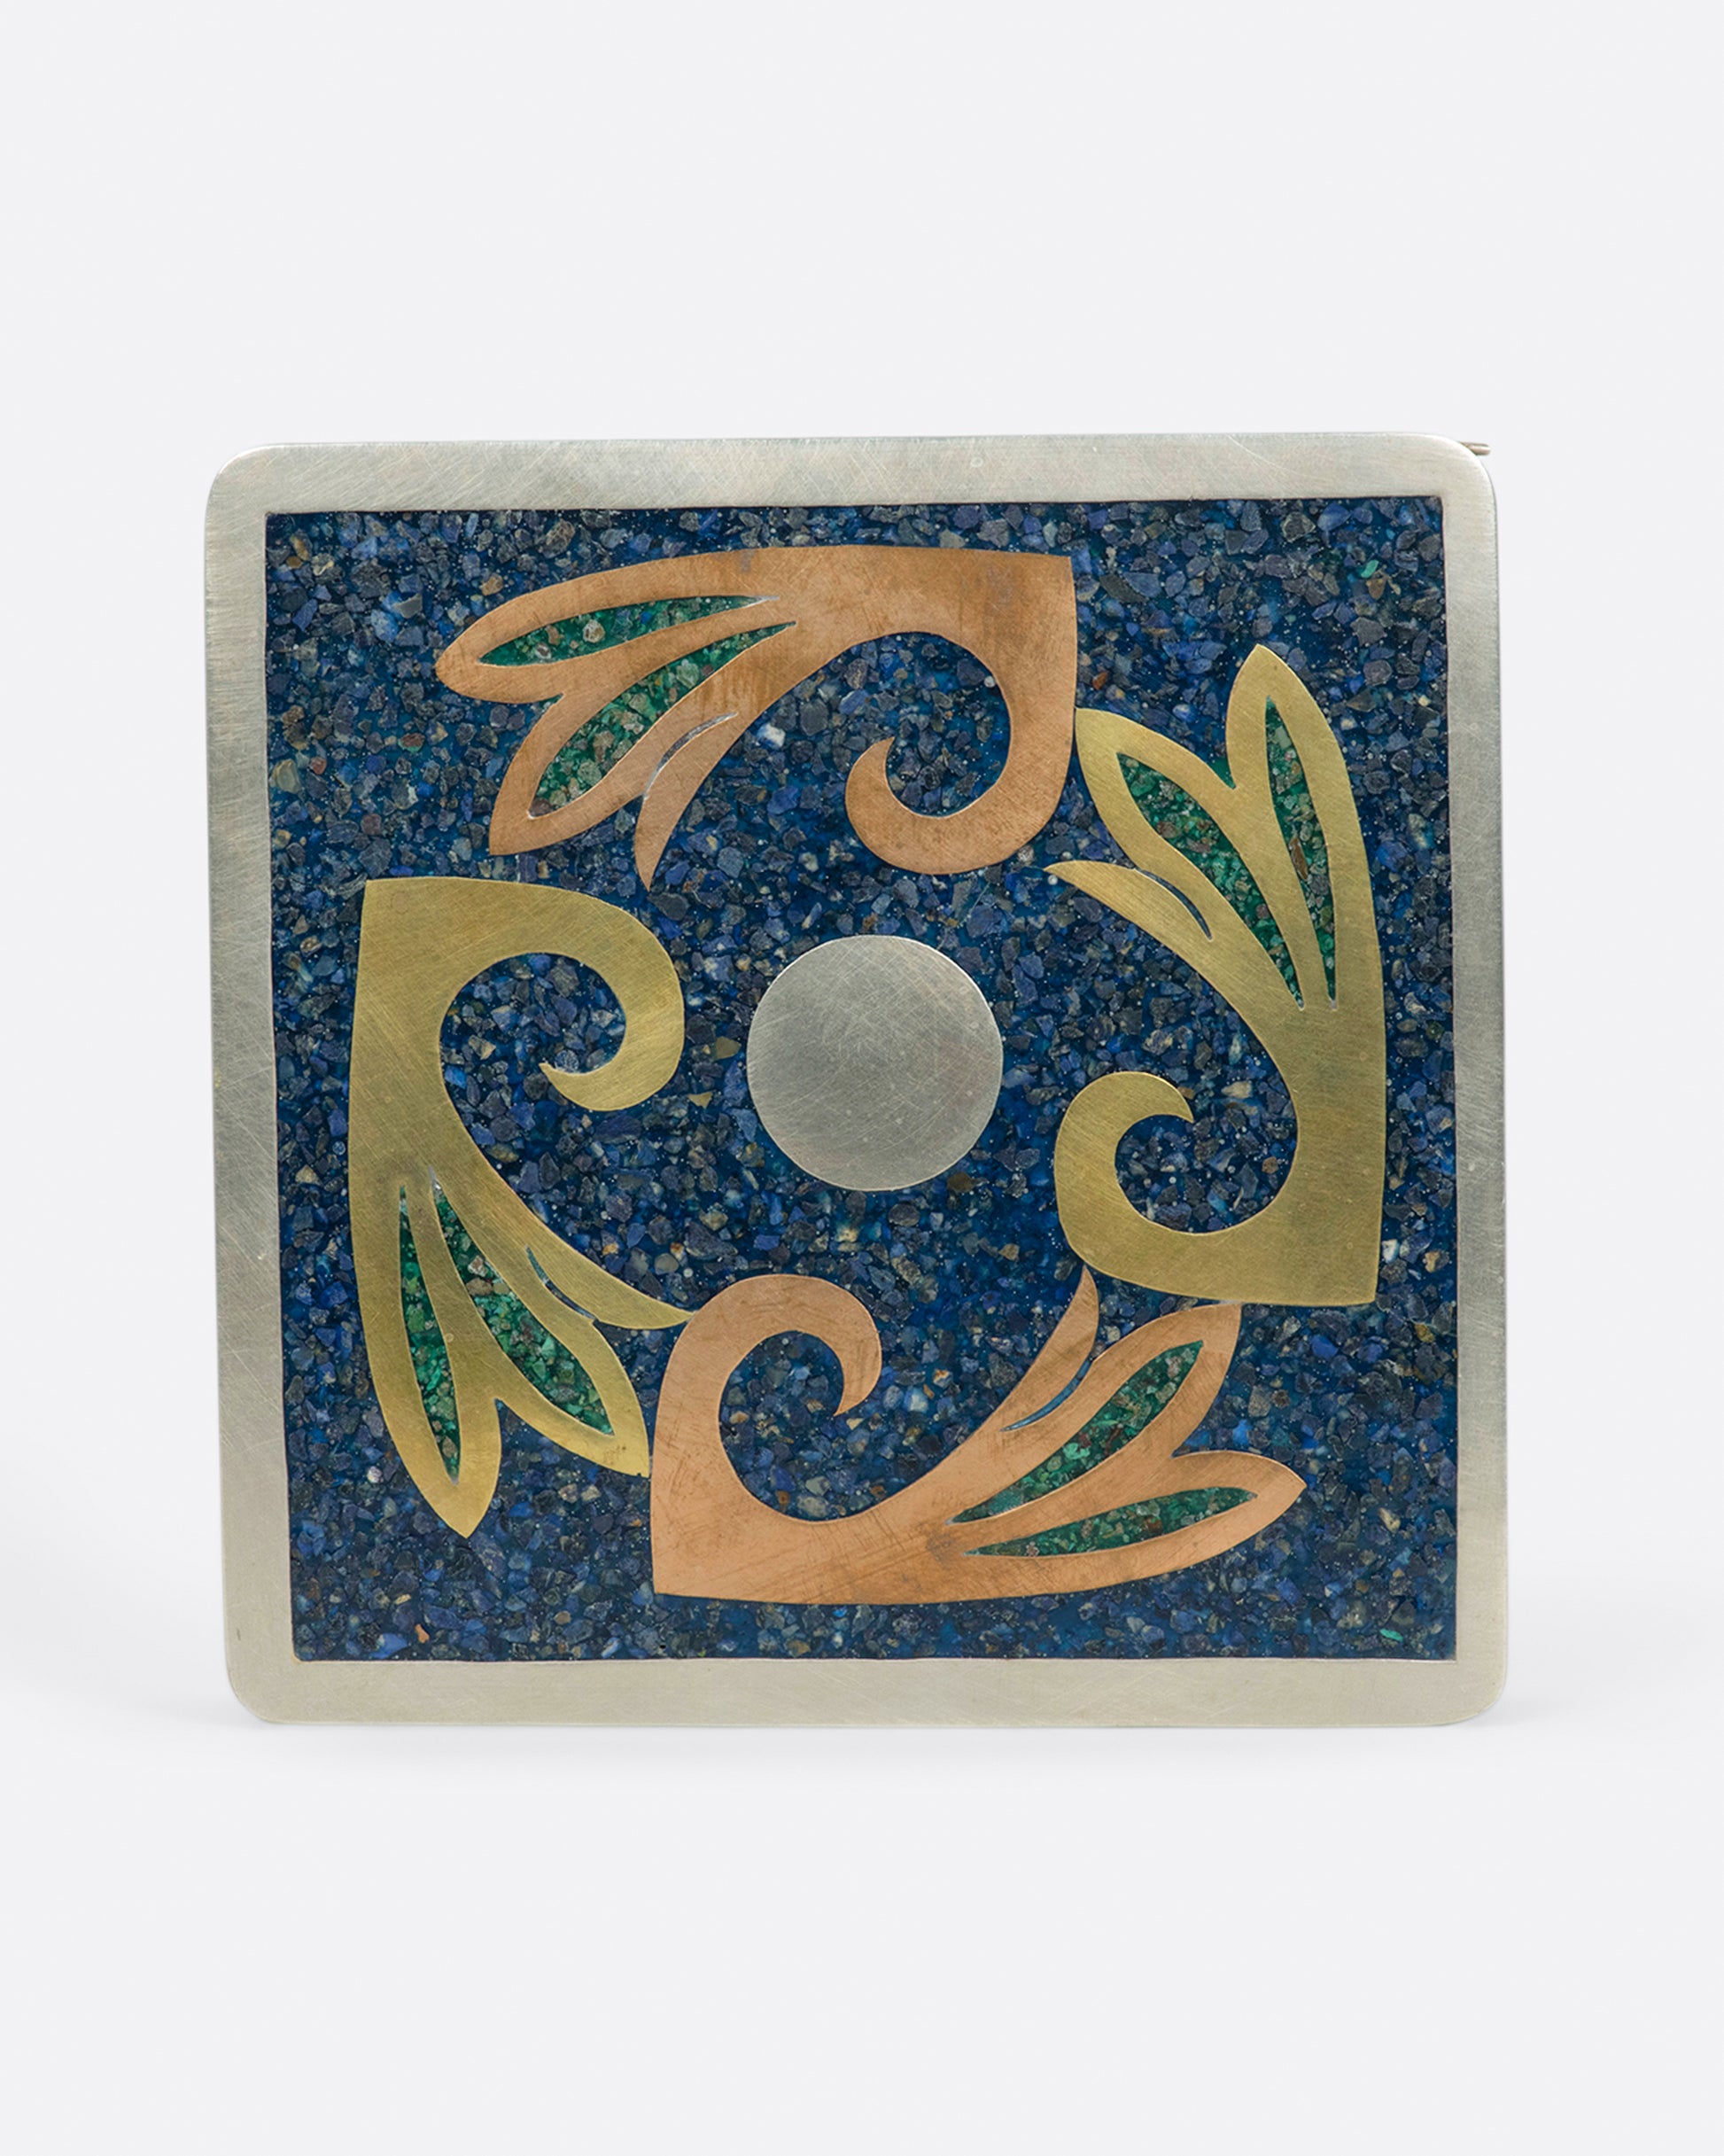 A Mexican, hinged box covered in sodalite malachite inlay and lined with wood.